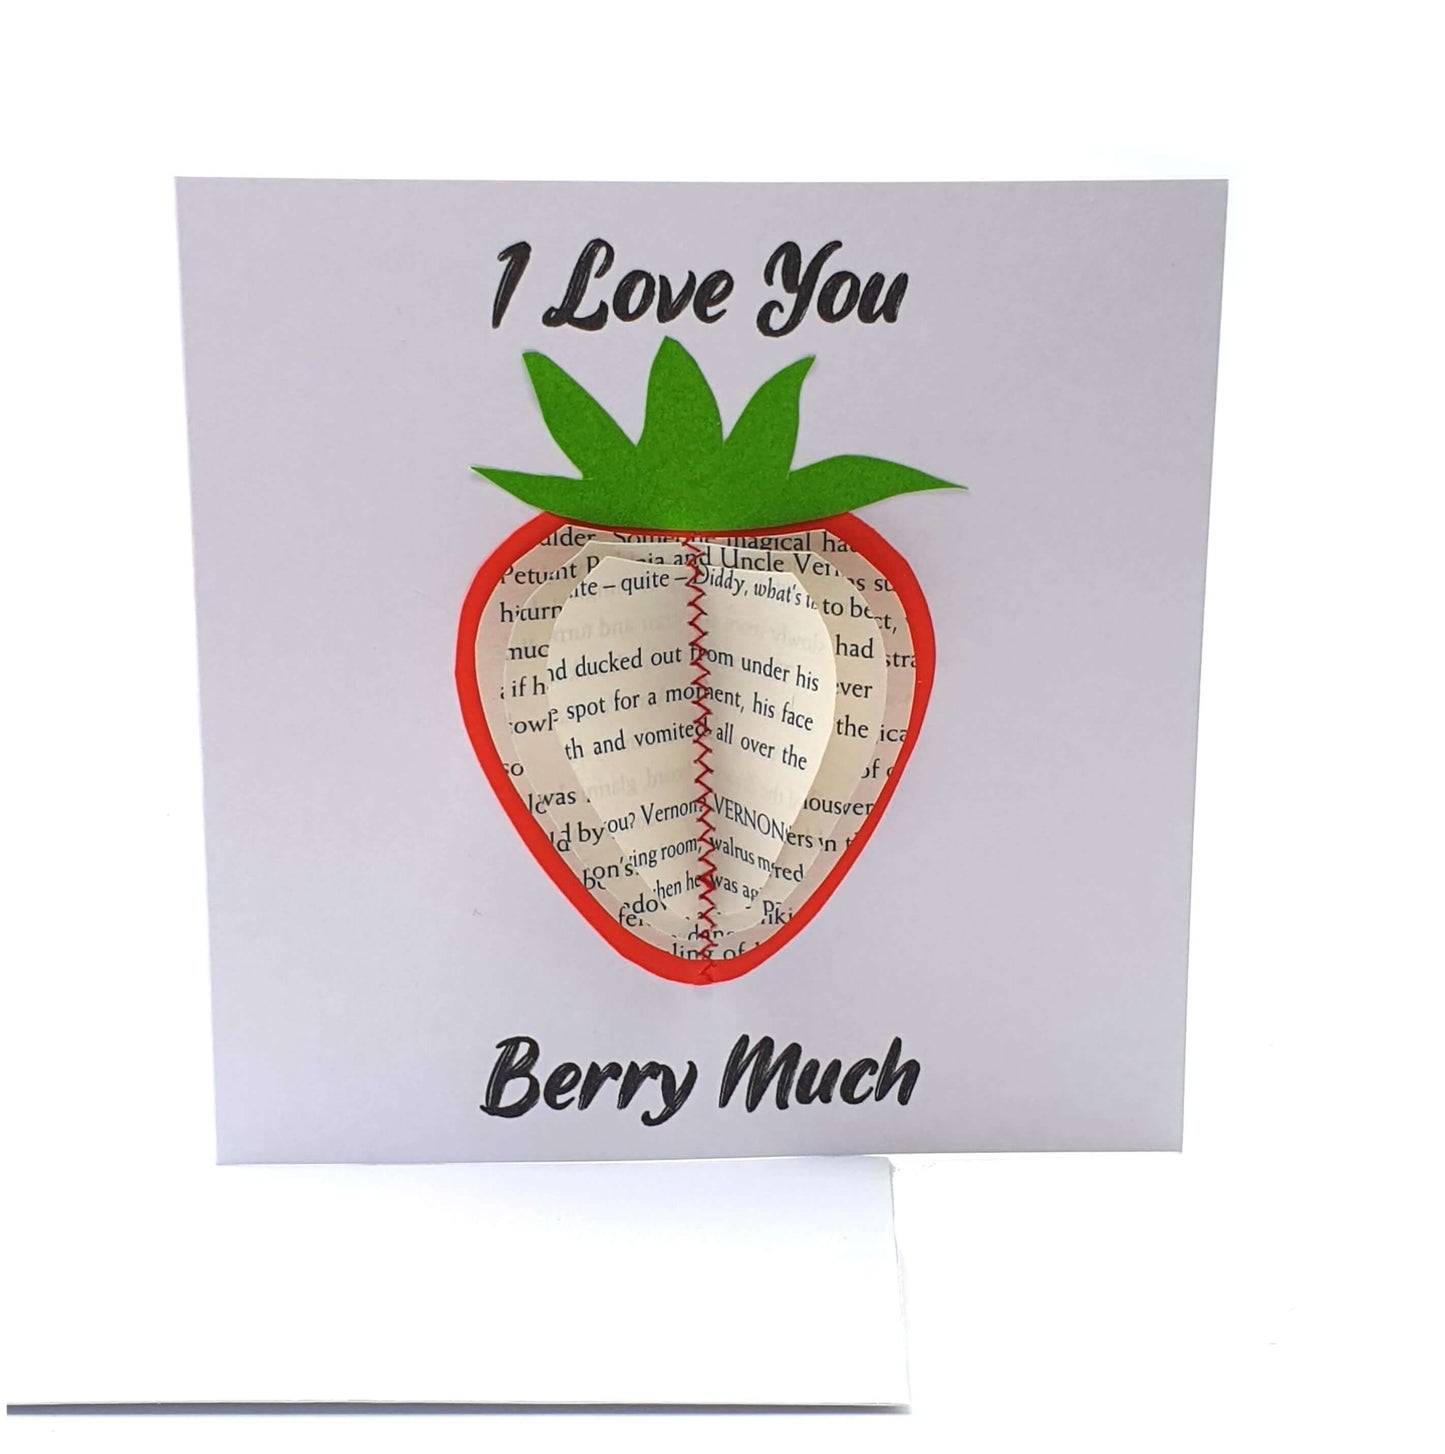 Strawberry Book Gift and Card